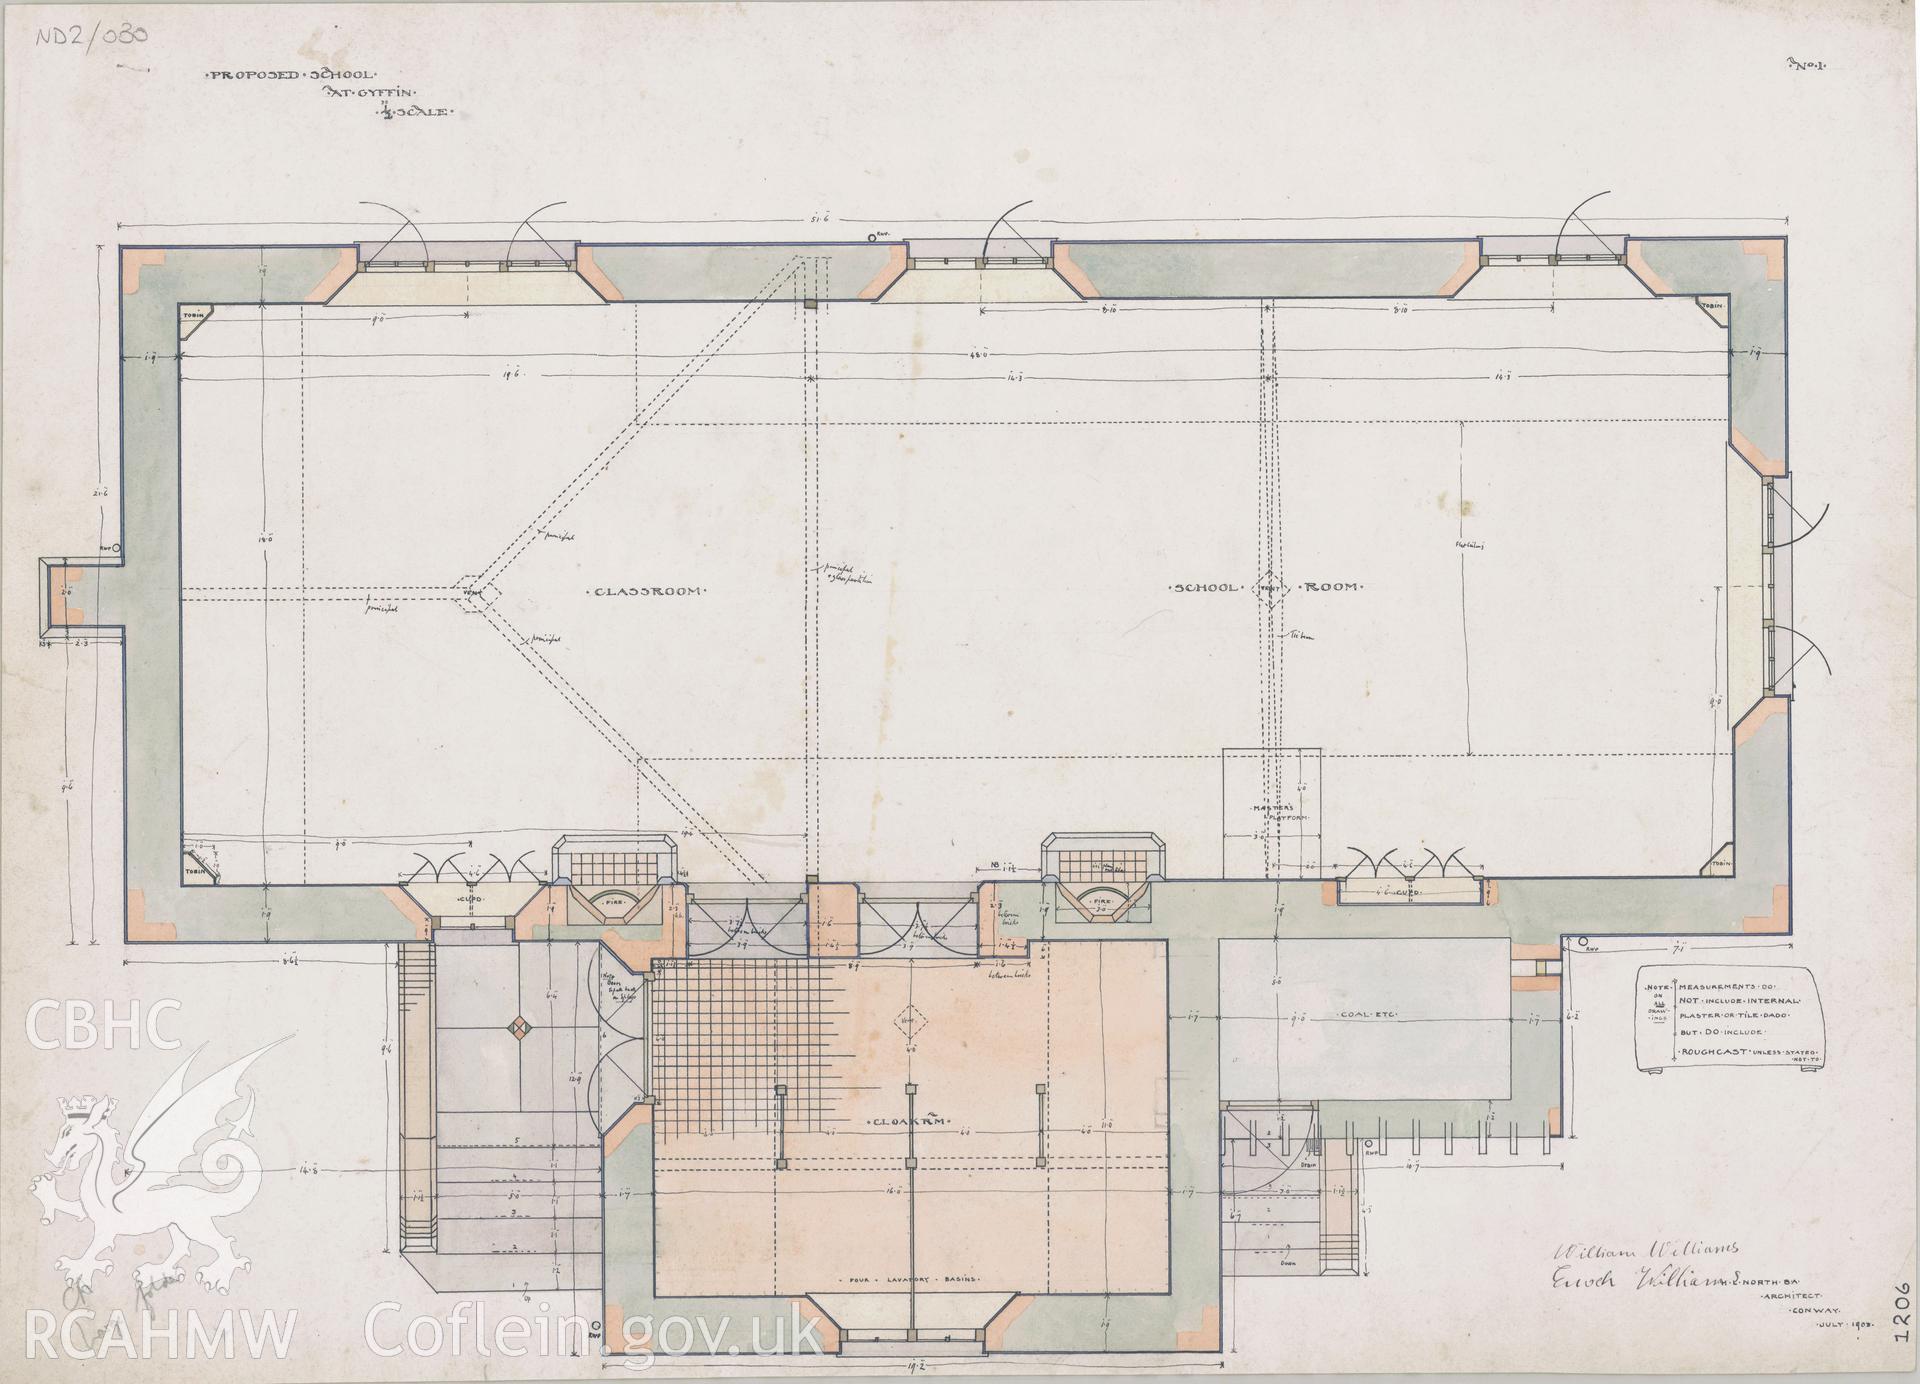 Ground floor plan for Gyffin National School main building, including the classroom, school room and cloakroom, pen and colour wash on paper, two feet to one inch.